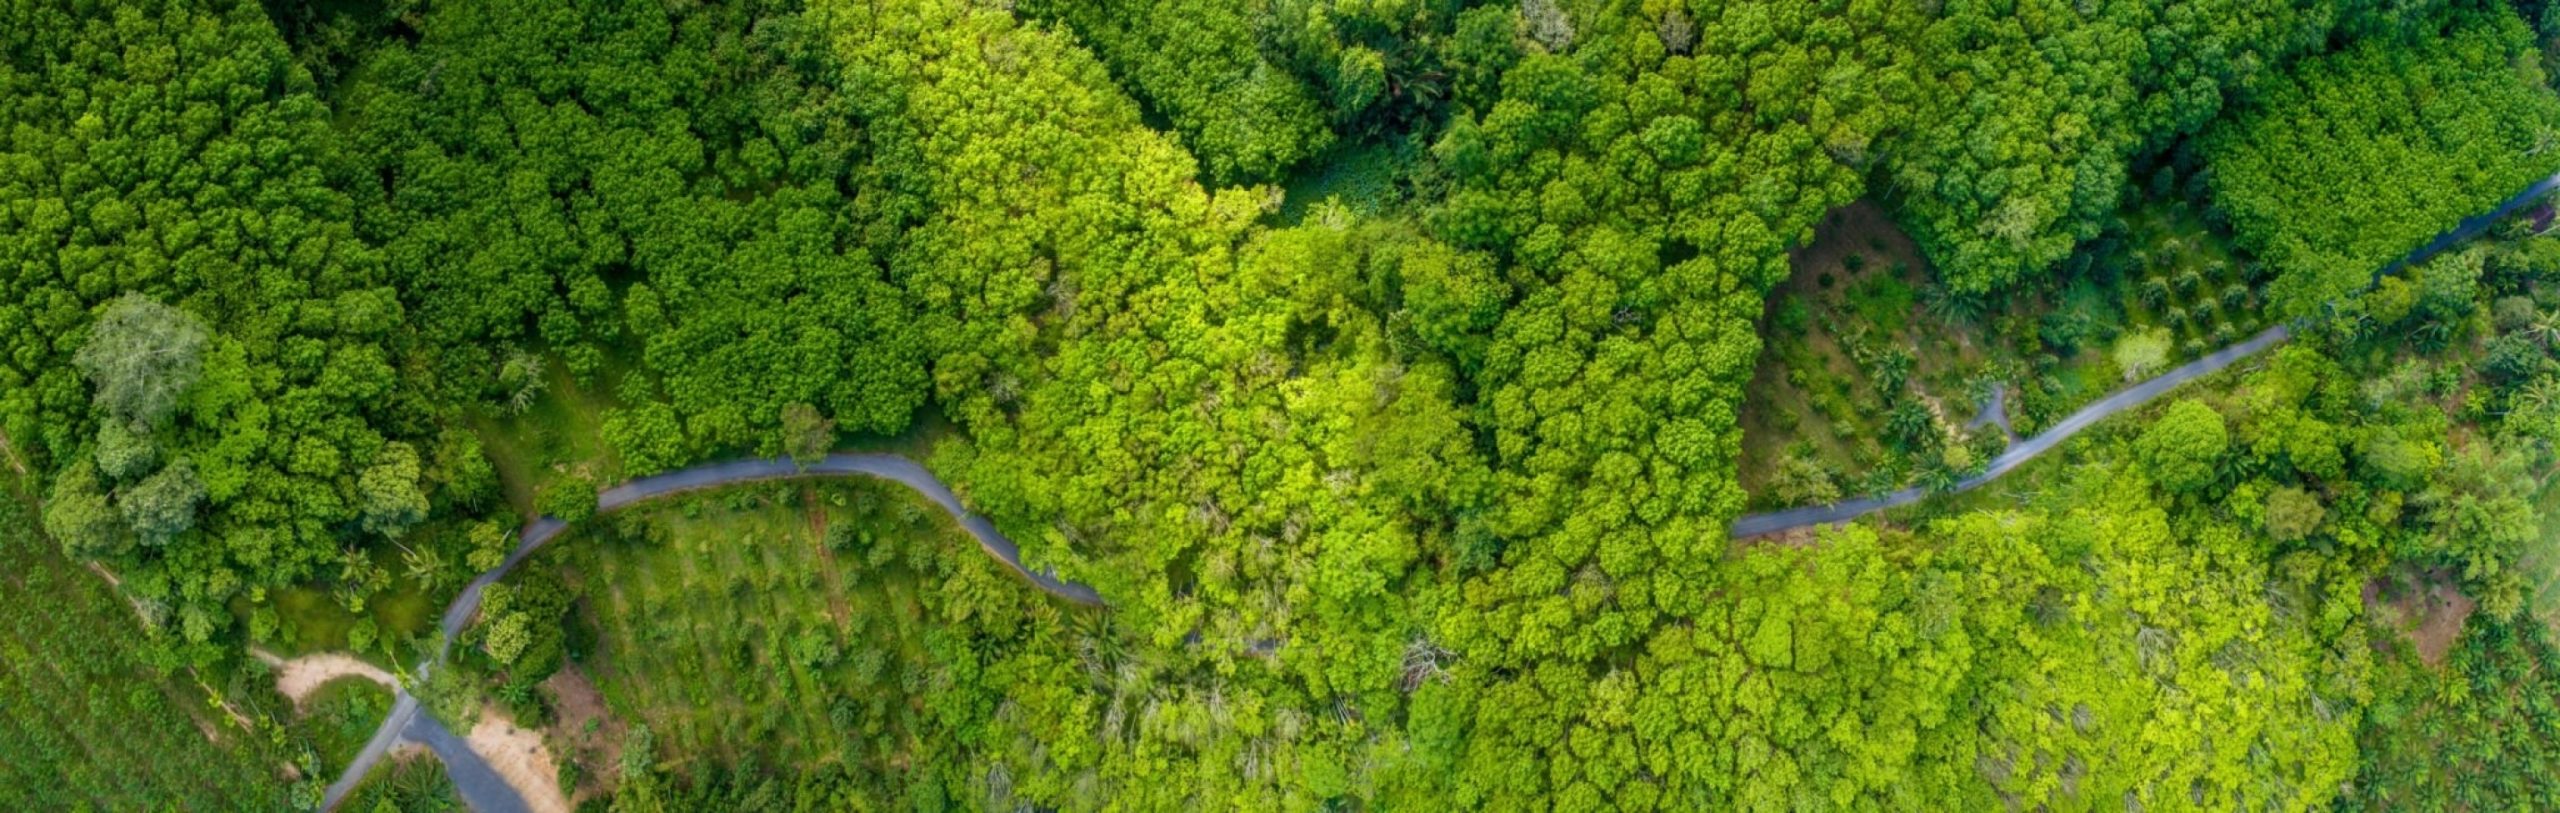 Aerial view of lush green leaves in a forest setting